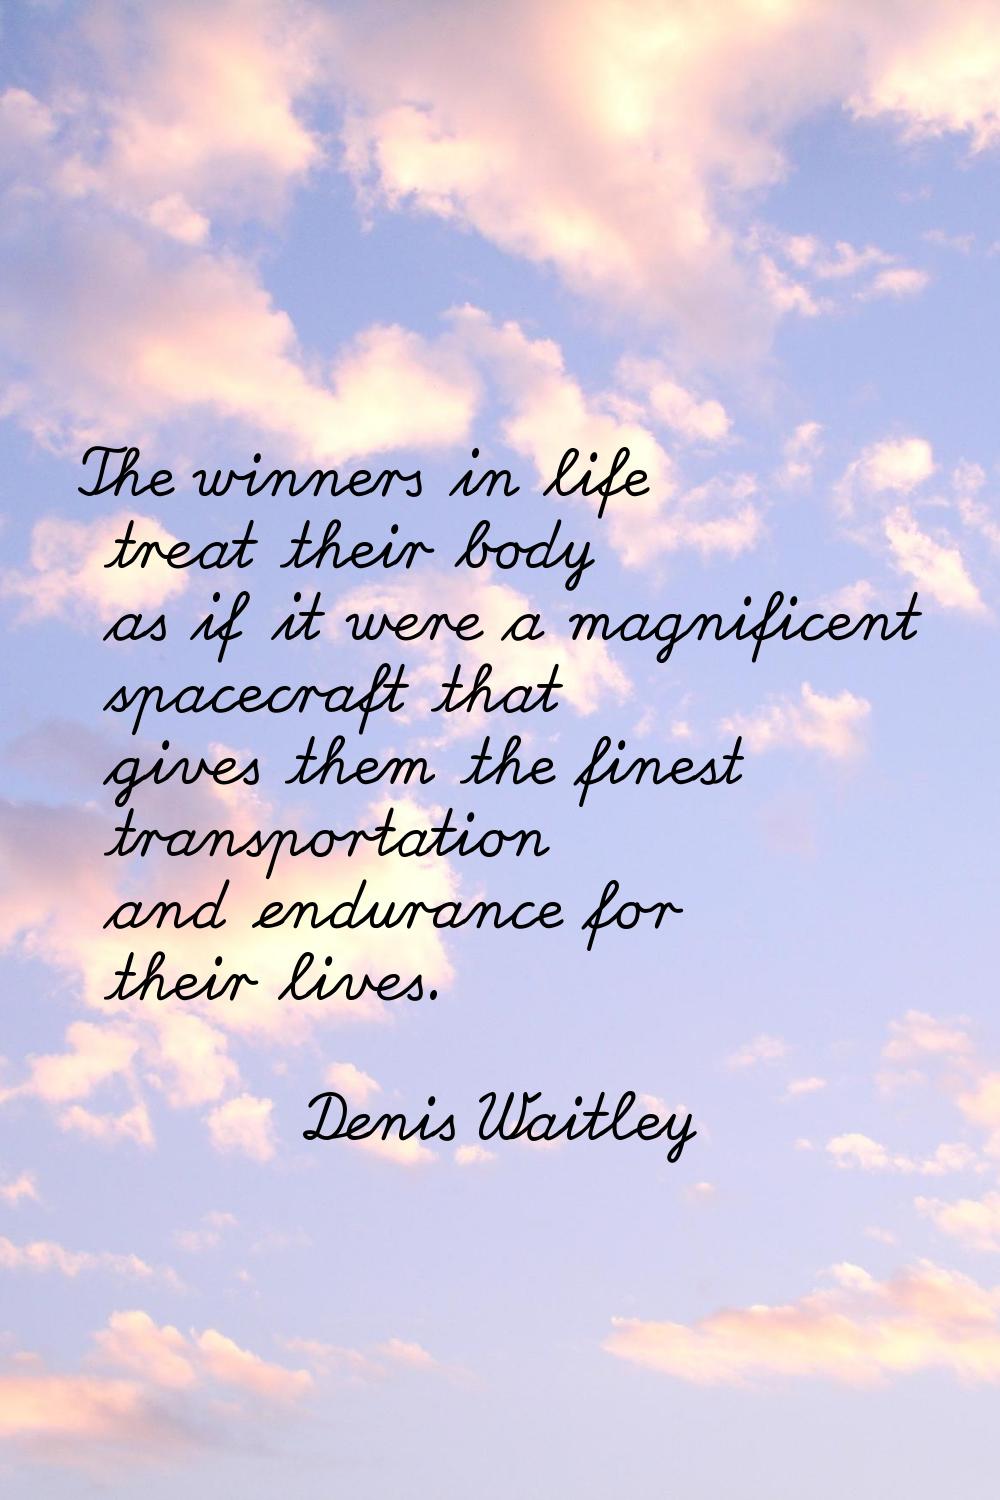 The winners in life treat their body as if it were a magnificent spacecraft that gives them the fin